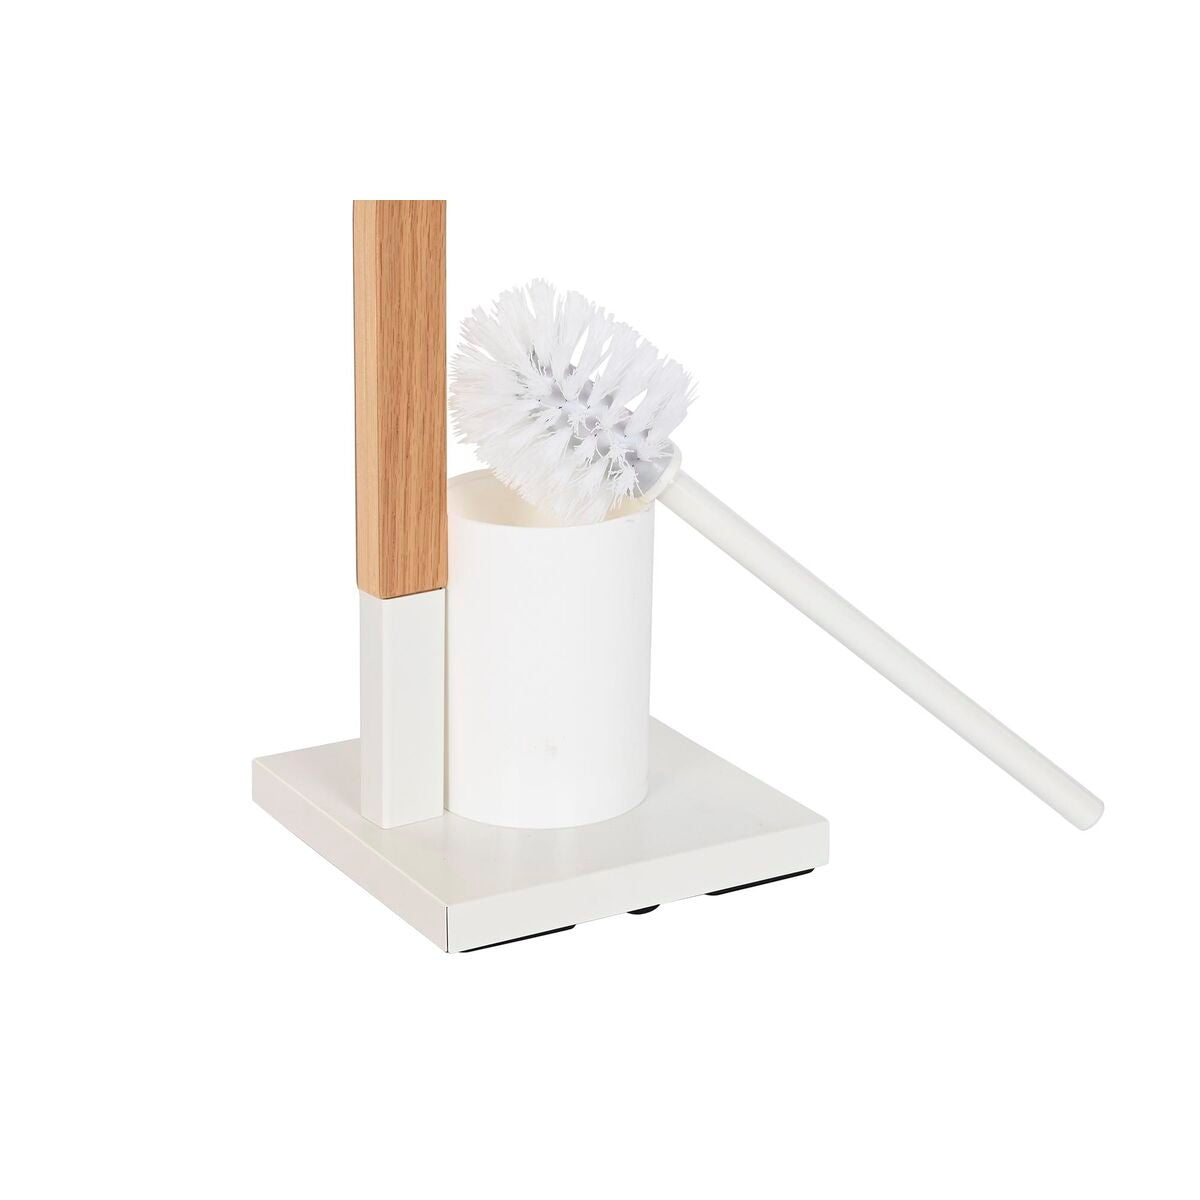 Toilet Paper Holder with Brush Stand DKD Home Decor Natural Wood Steel